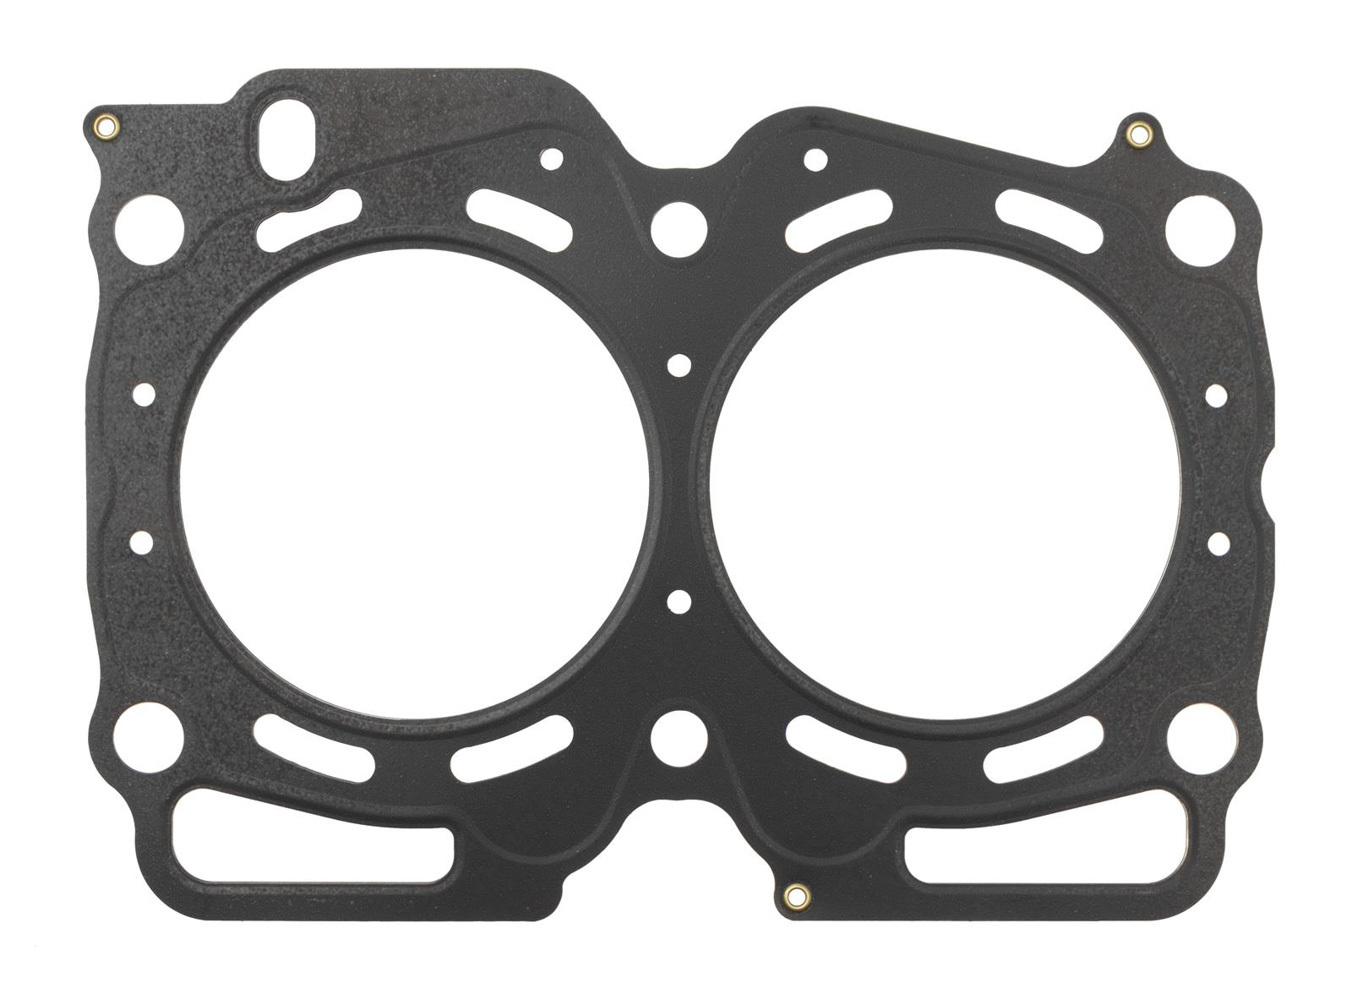 SCE Gaskets M338235GS - Cylinder Head Gasket, MLS Spartan, 100.00 mm Bore, 1.00 mm Compression Thickness, Multi-Layer Steel, Subaru 4-Cylinder, Each